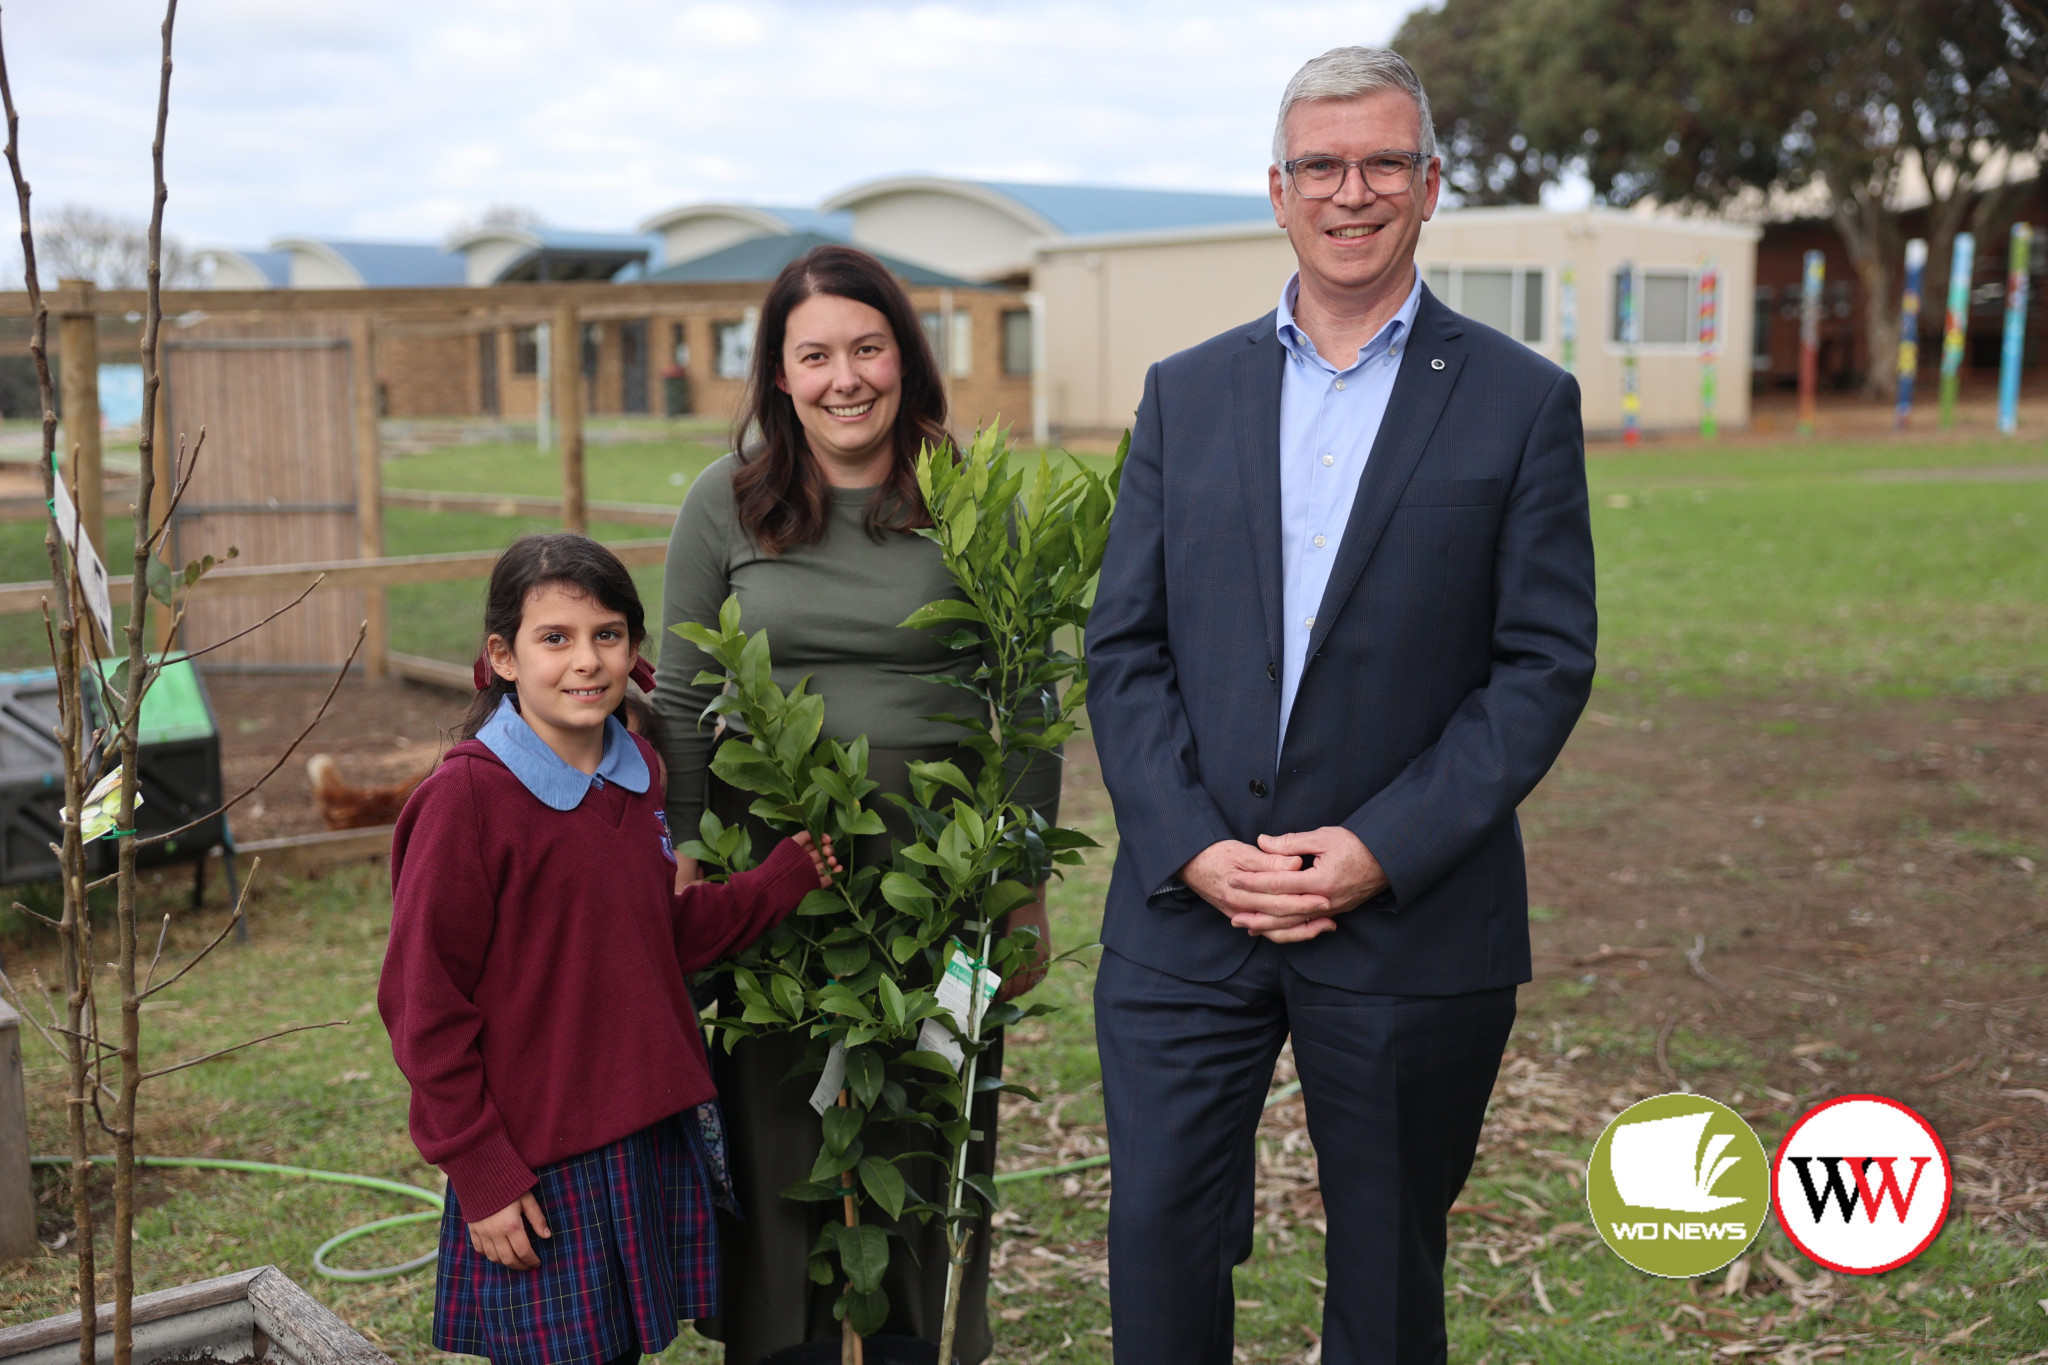 Kings College year two student Alena Topraz was the instigator behind the planting of all kinds of fruit trees on the campus grounds, which will be enjoyed by students in the coming months. Pictured with Alena is her proud mum Nadia and college principal Allister Rouse.